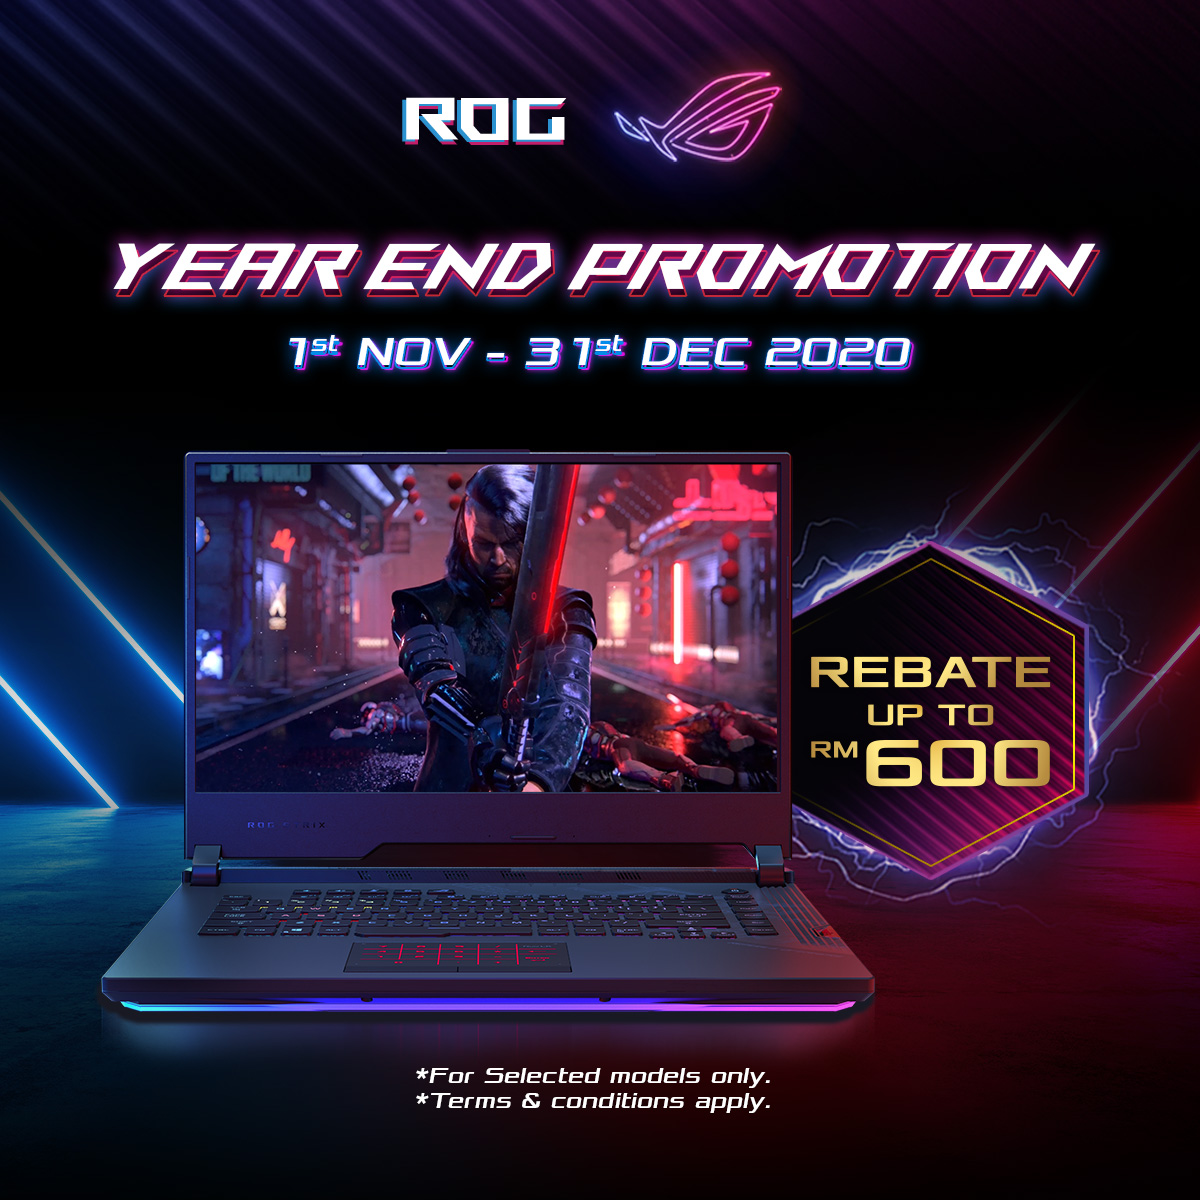 ASUS ROG Year End Promotion Offers up to RM600 Off